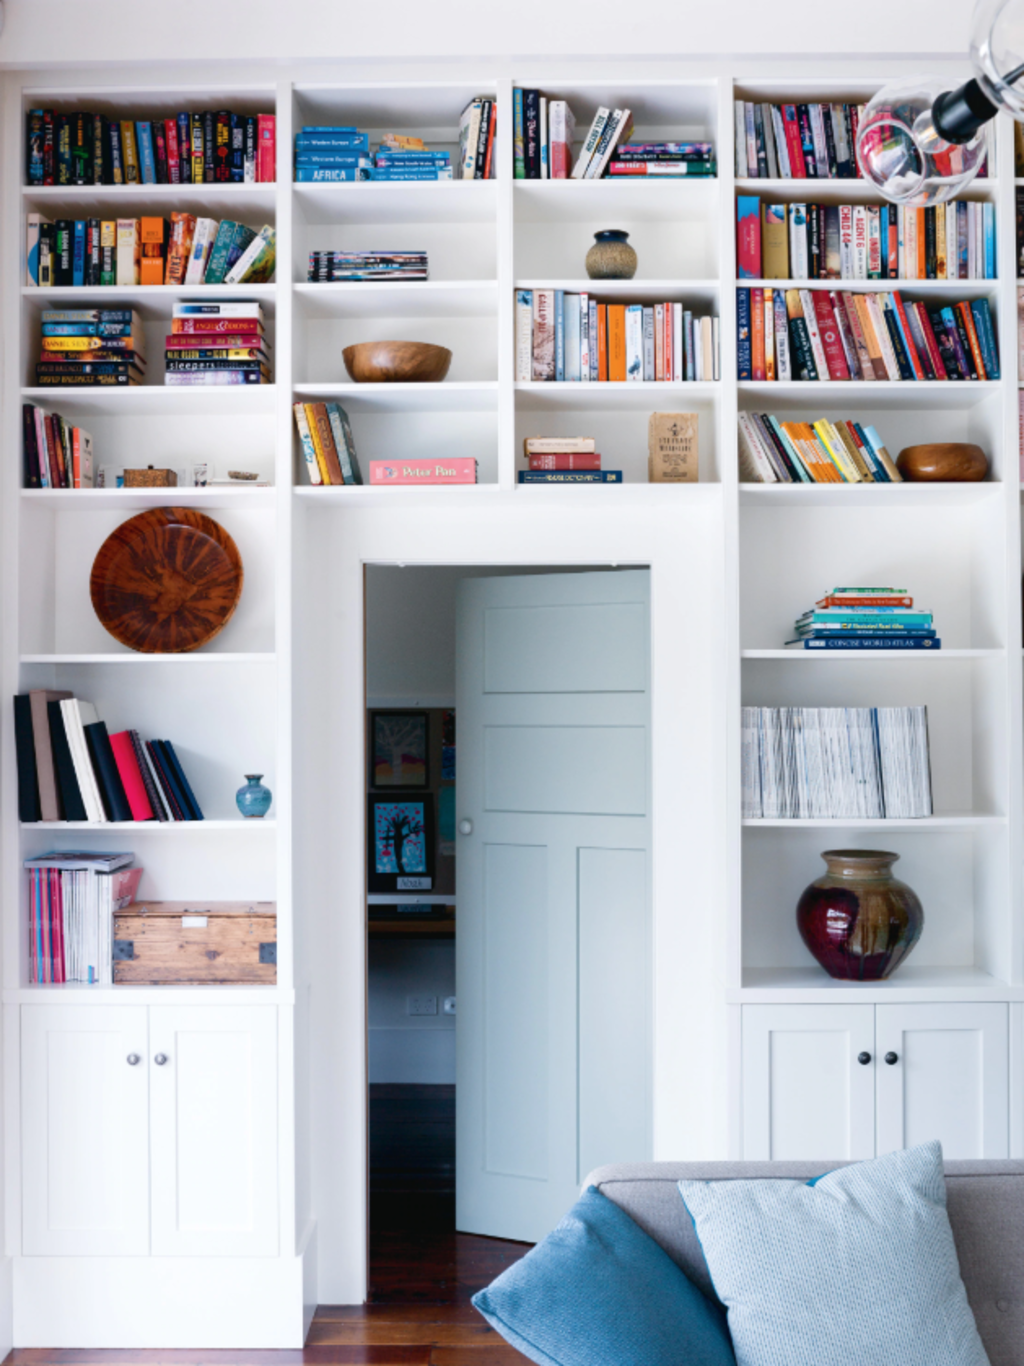 Place precious items out of reach of inquisitive hands. Photo: NZ House and Garden